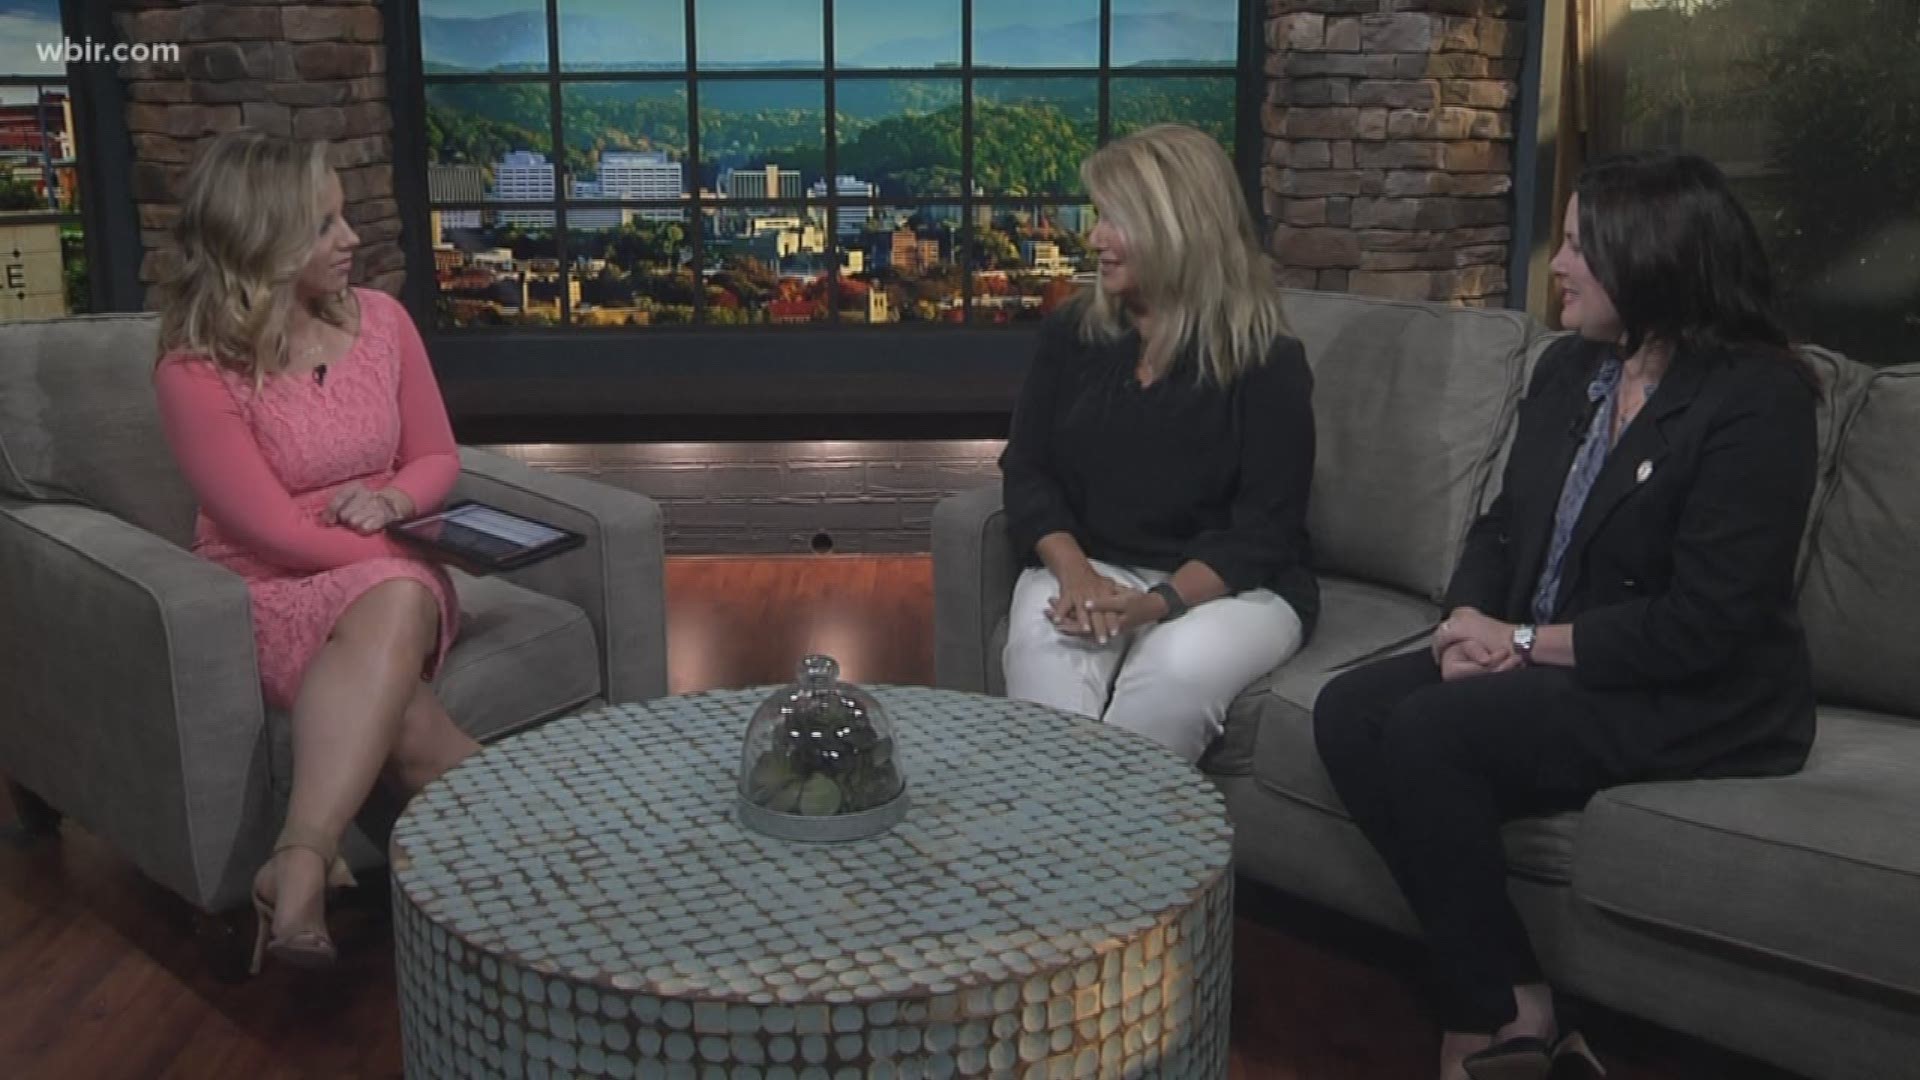 Angela Wampler talks about the upcoming Forget Me Not 5K benefiting Alzheimer's and The Pat Summit Foundation.